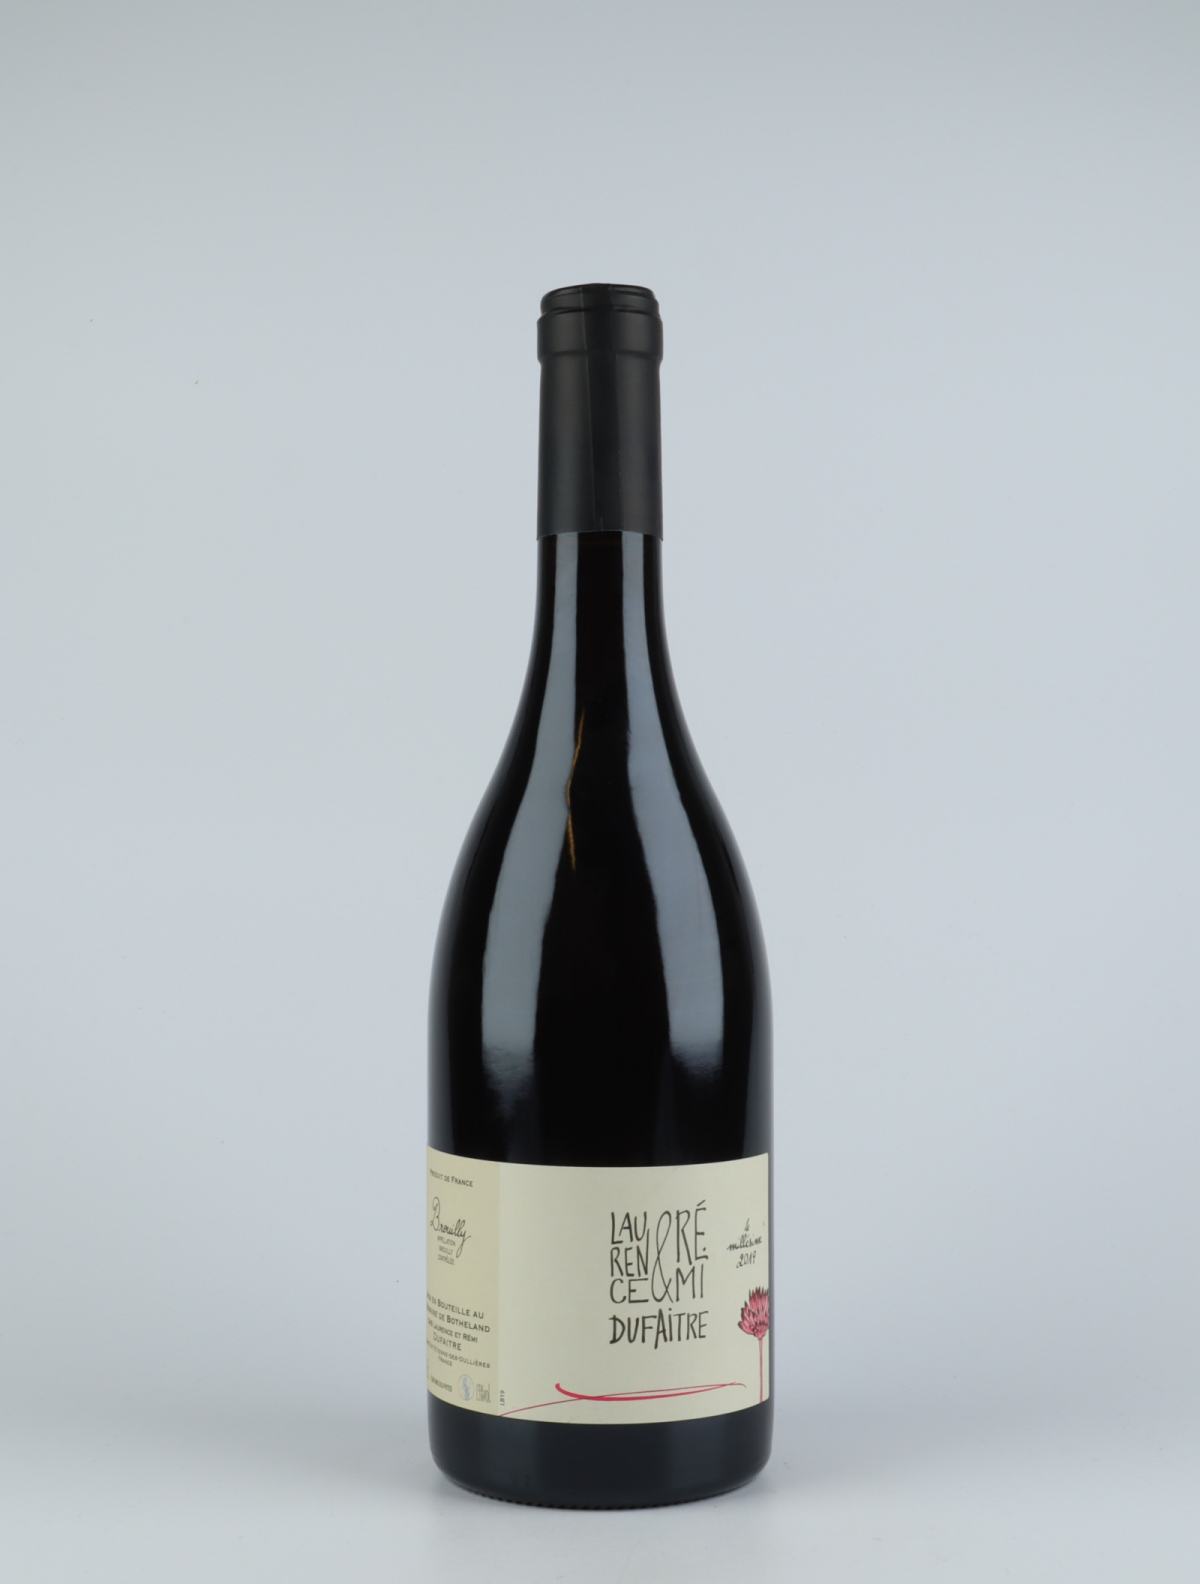 A bottle 2019 Brouilly Red wine from Laurence & Rémi Dufaitre, Beaujolais in France